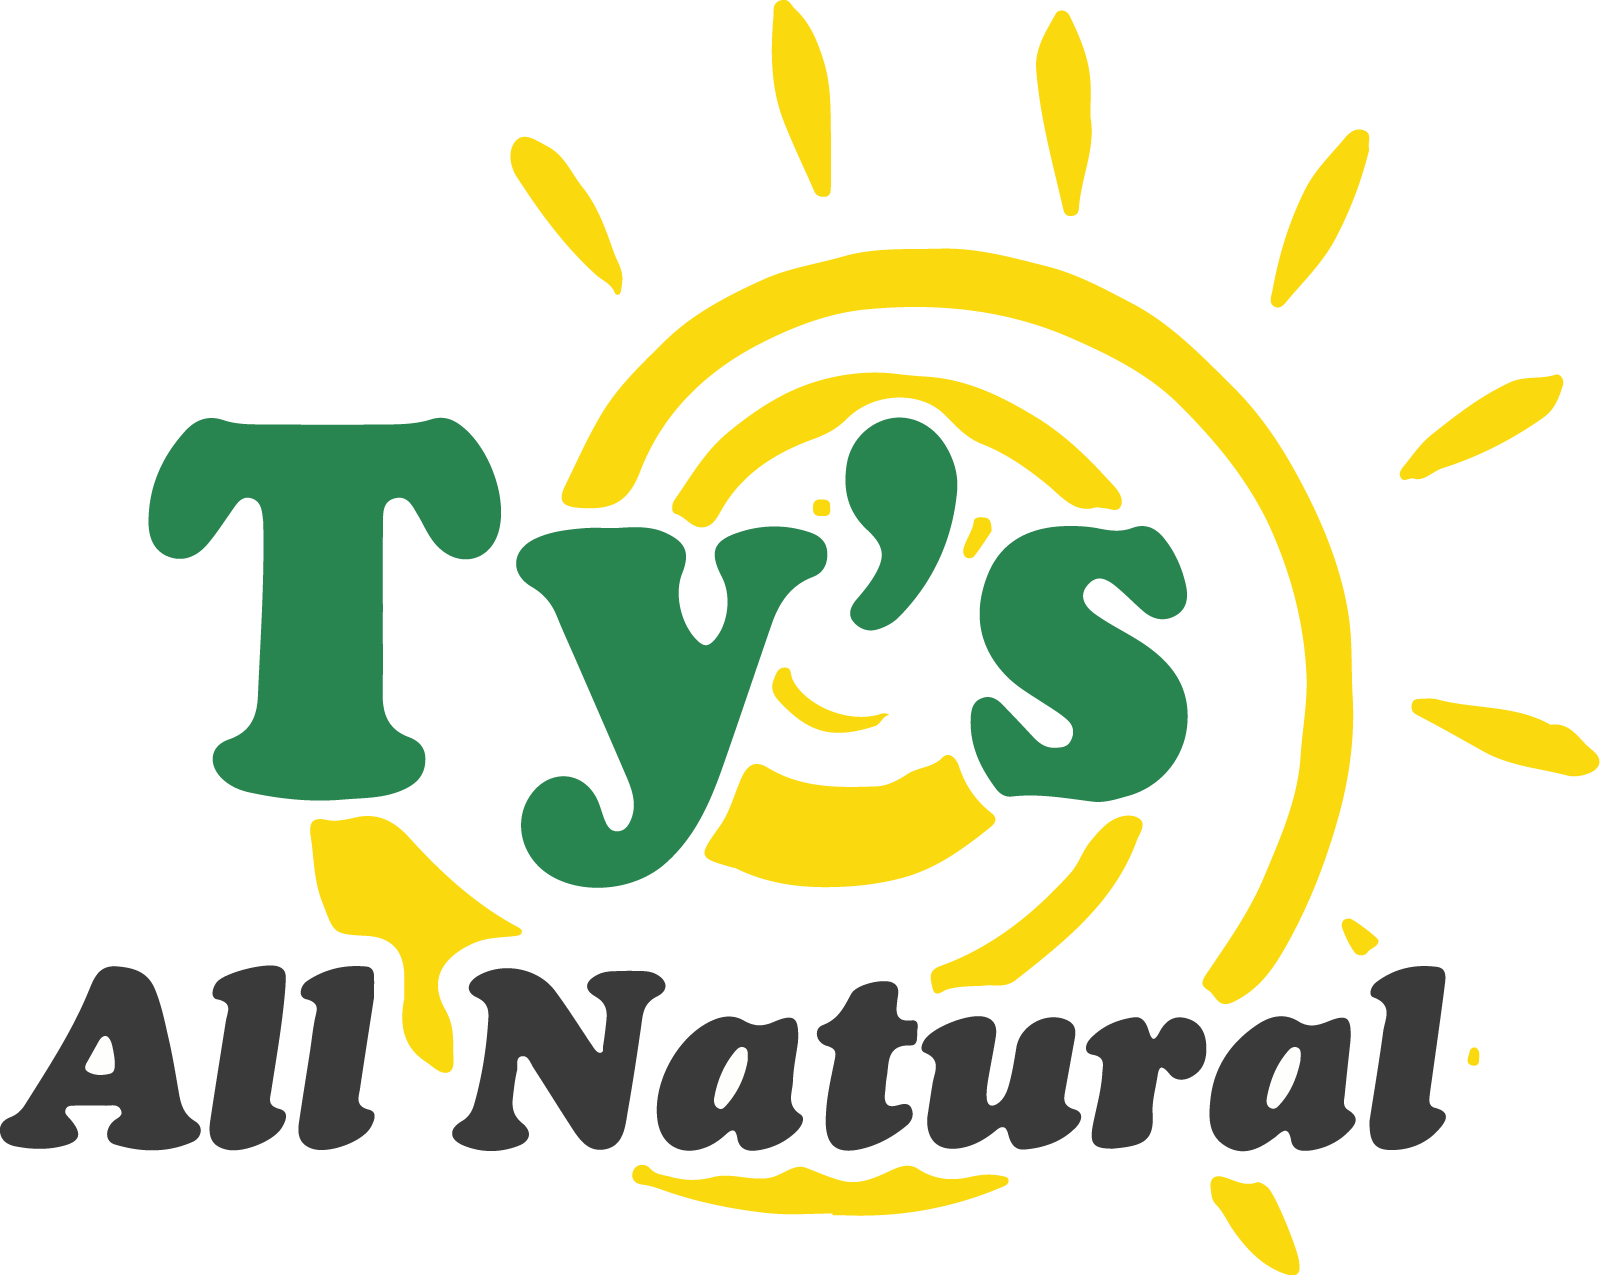 Ty's All Natural Food Truck - Ty's All Natural Food Truck (1600x1275)